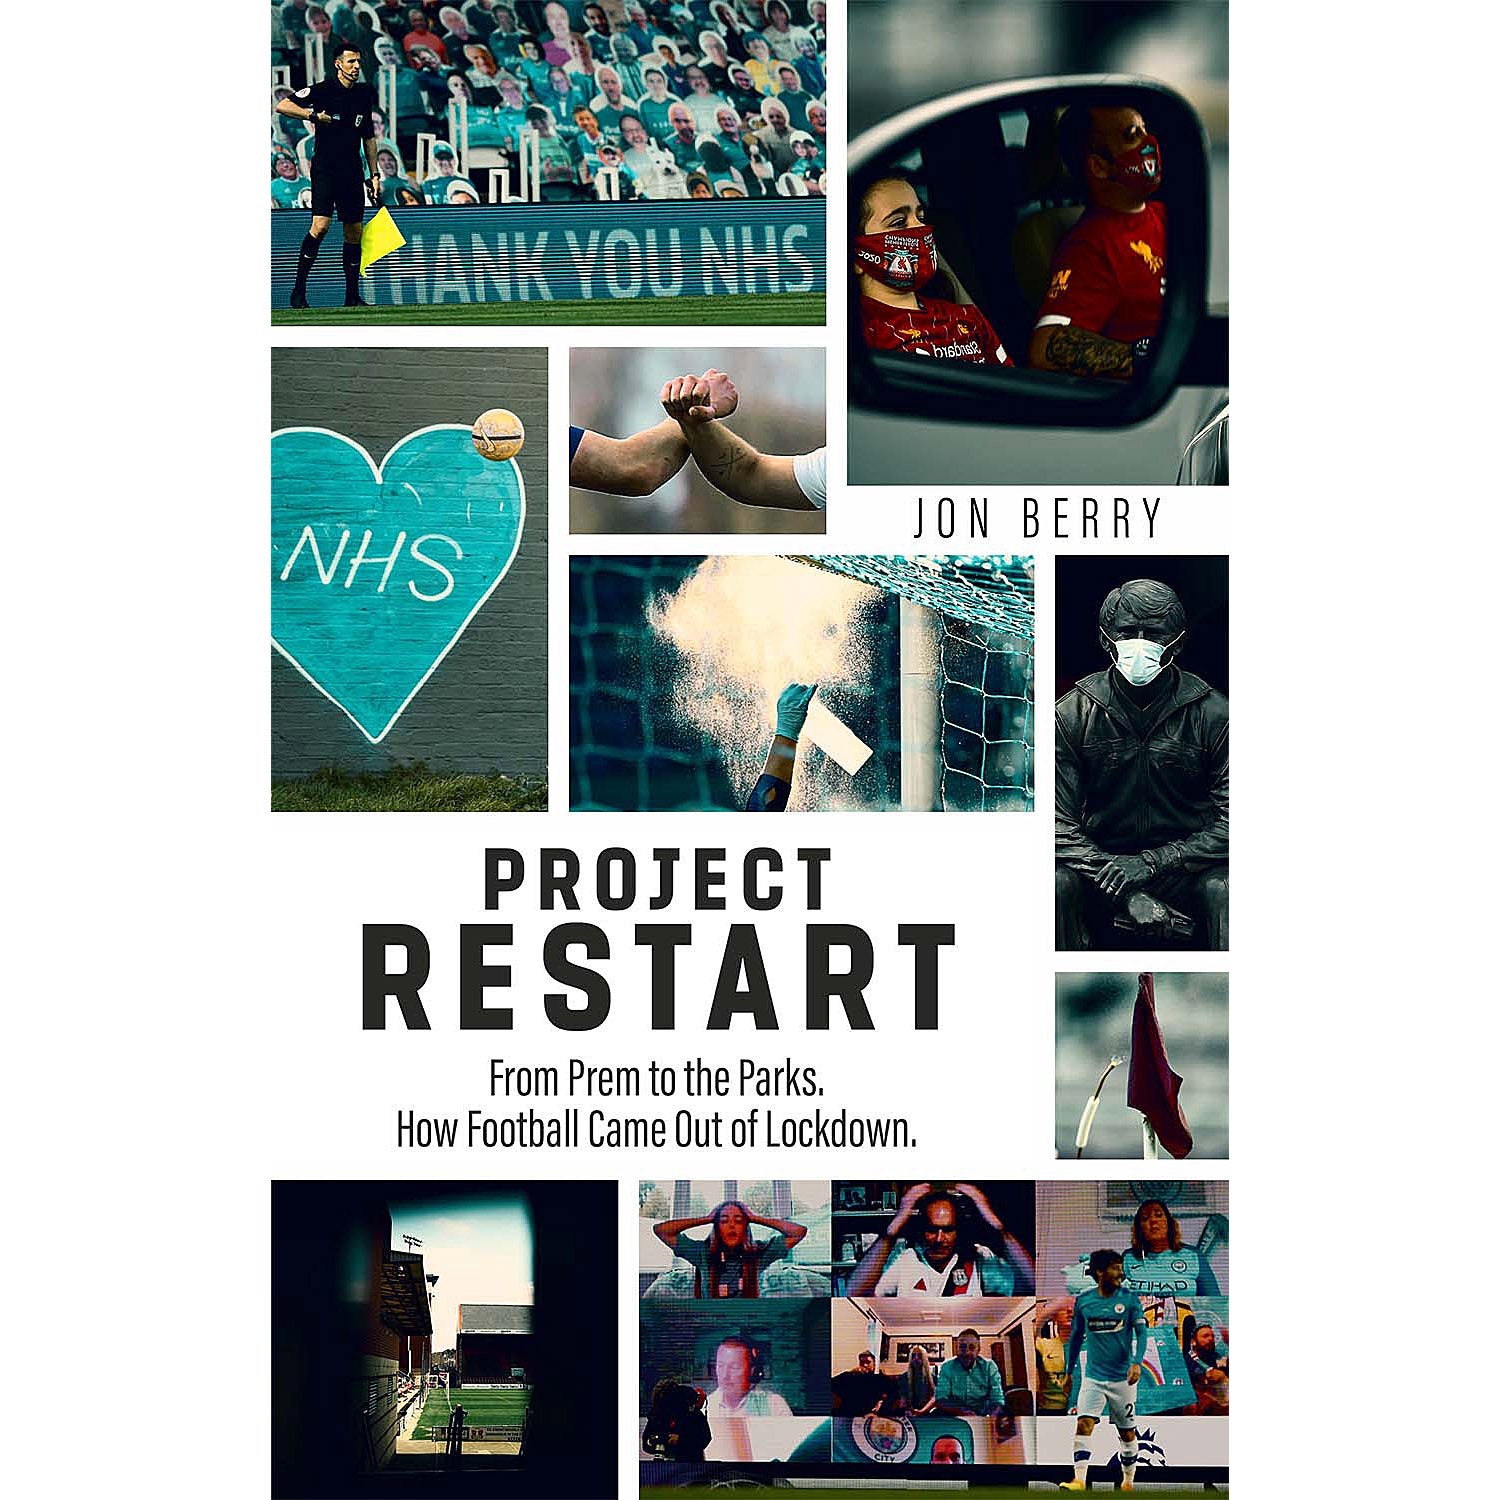 Project Restart – From Prem to the Parks, How Football Came Out of Lockdown